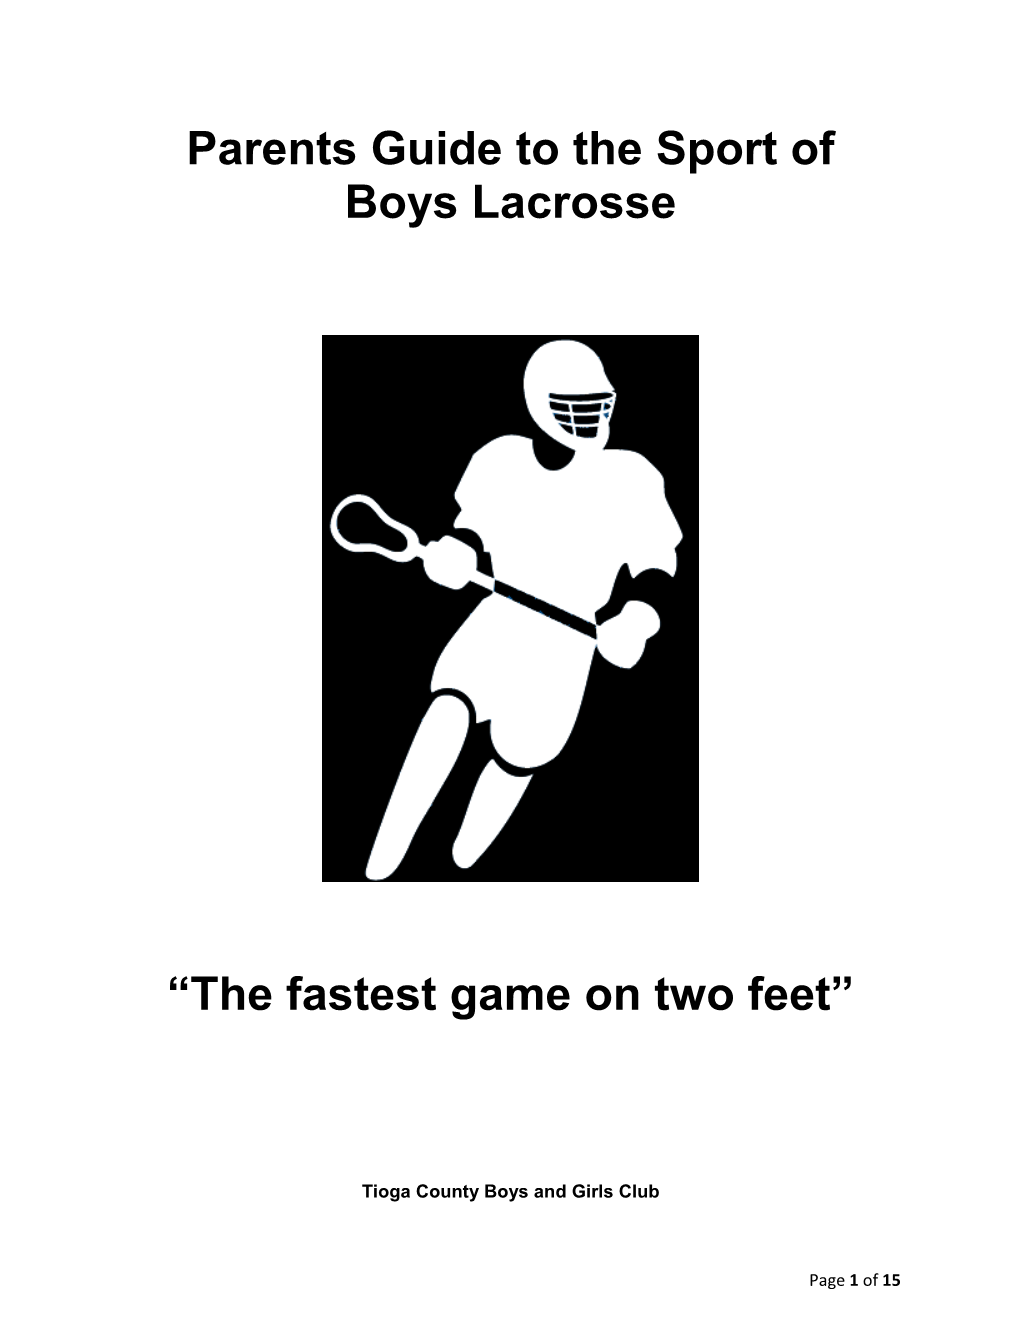 Parents Guide to the Sport of Boys Lacrosse “The Fastest Game on Two